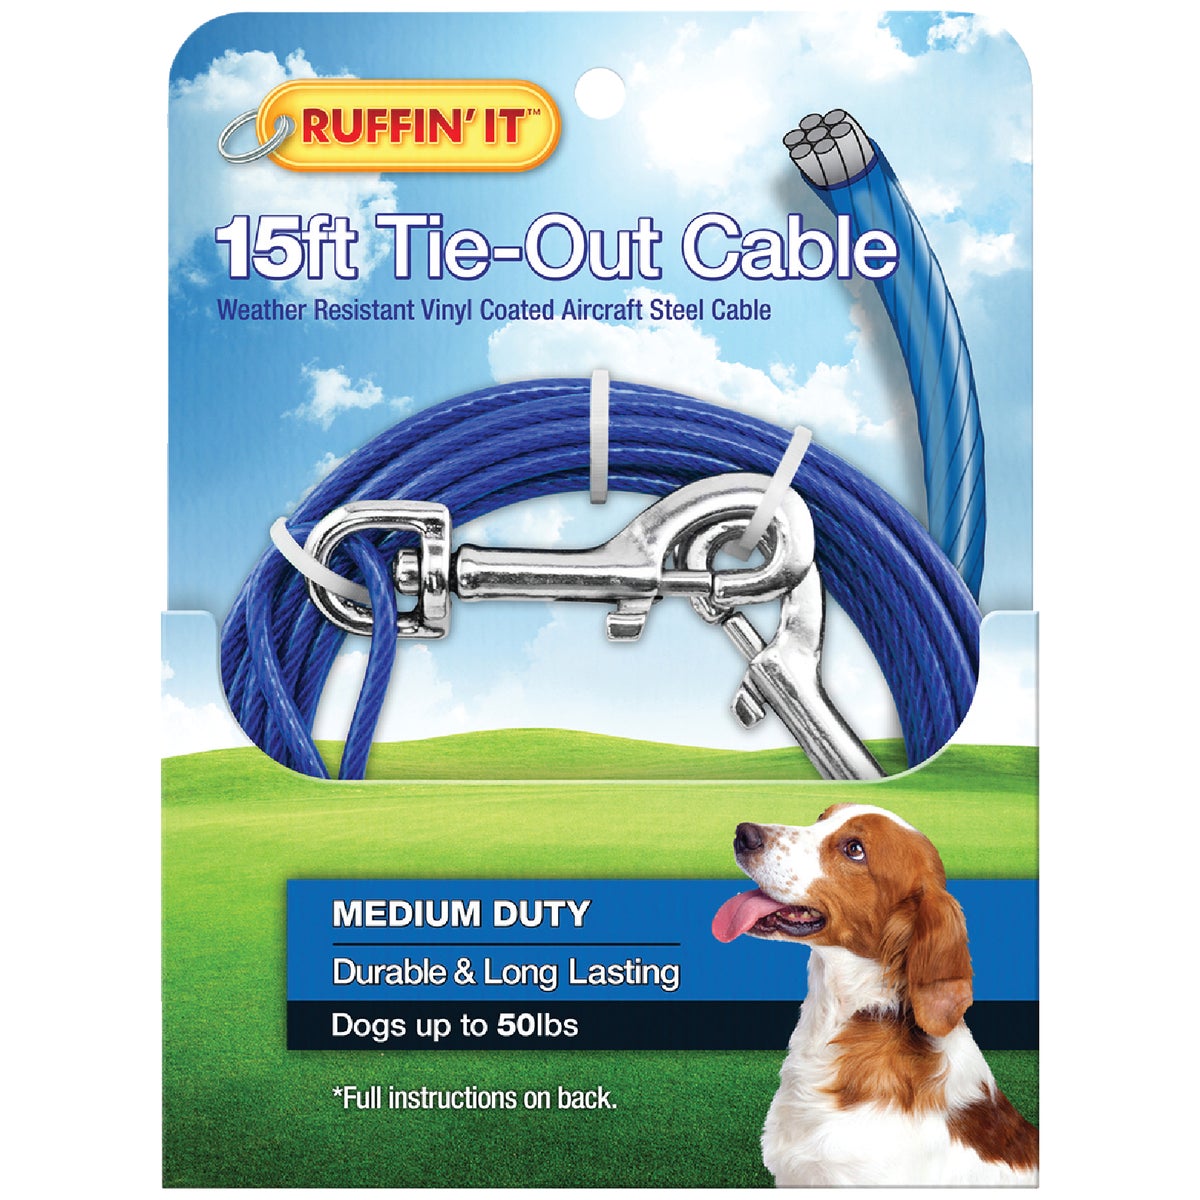 15′ TIE-OUT CABLE